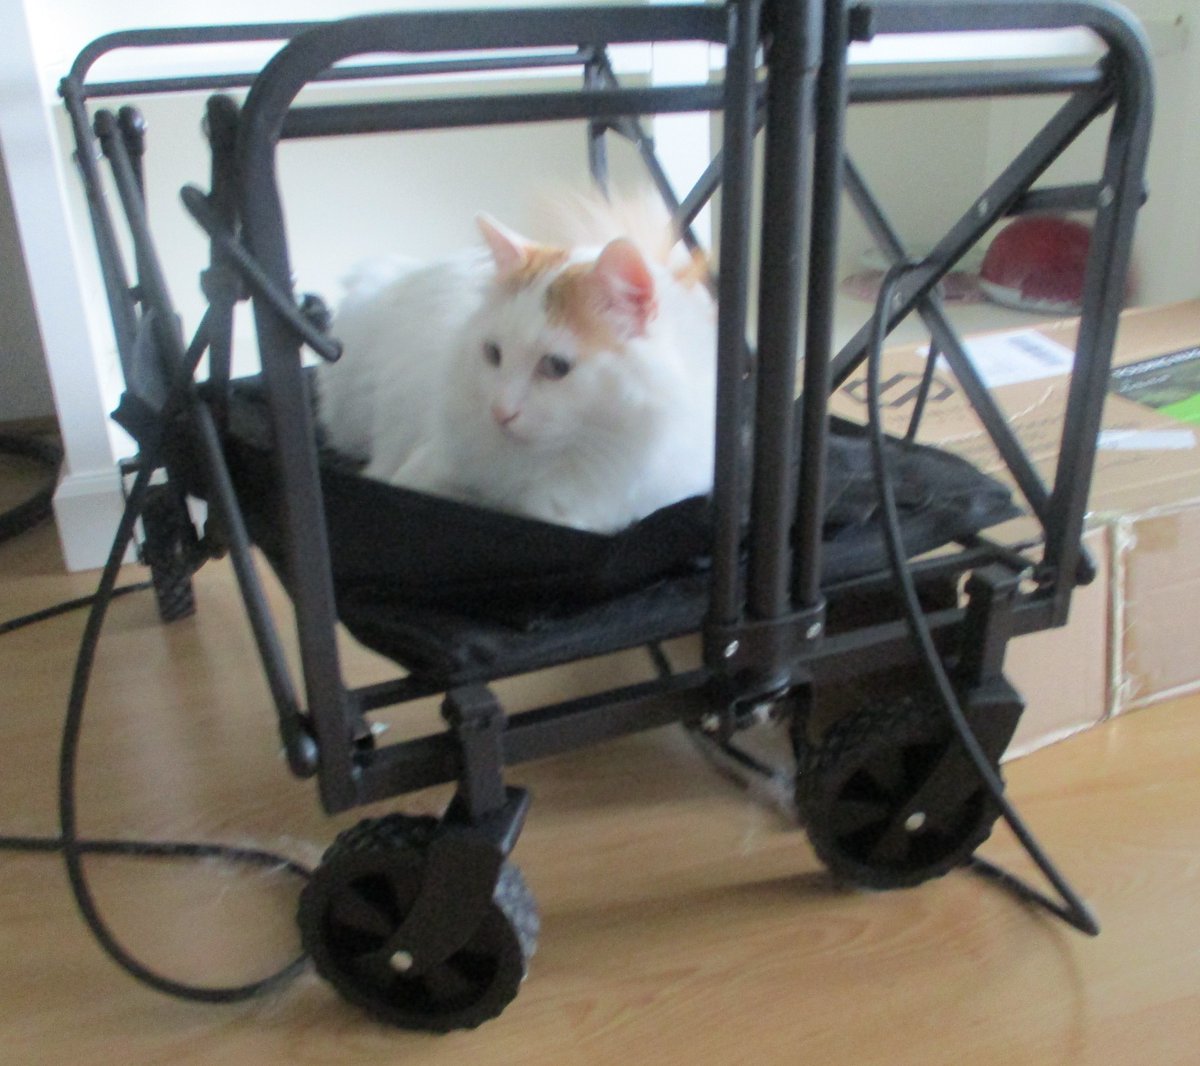 I like to ride on anything that has wheels.
#TurkishVanCats #CatsOfTwitter